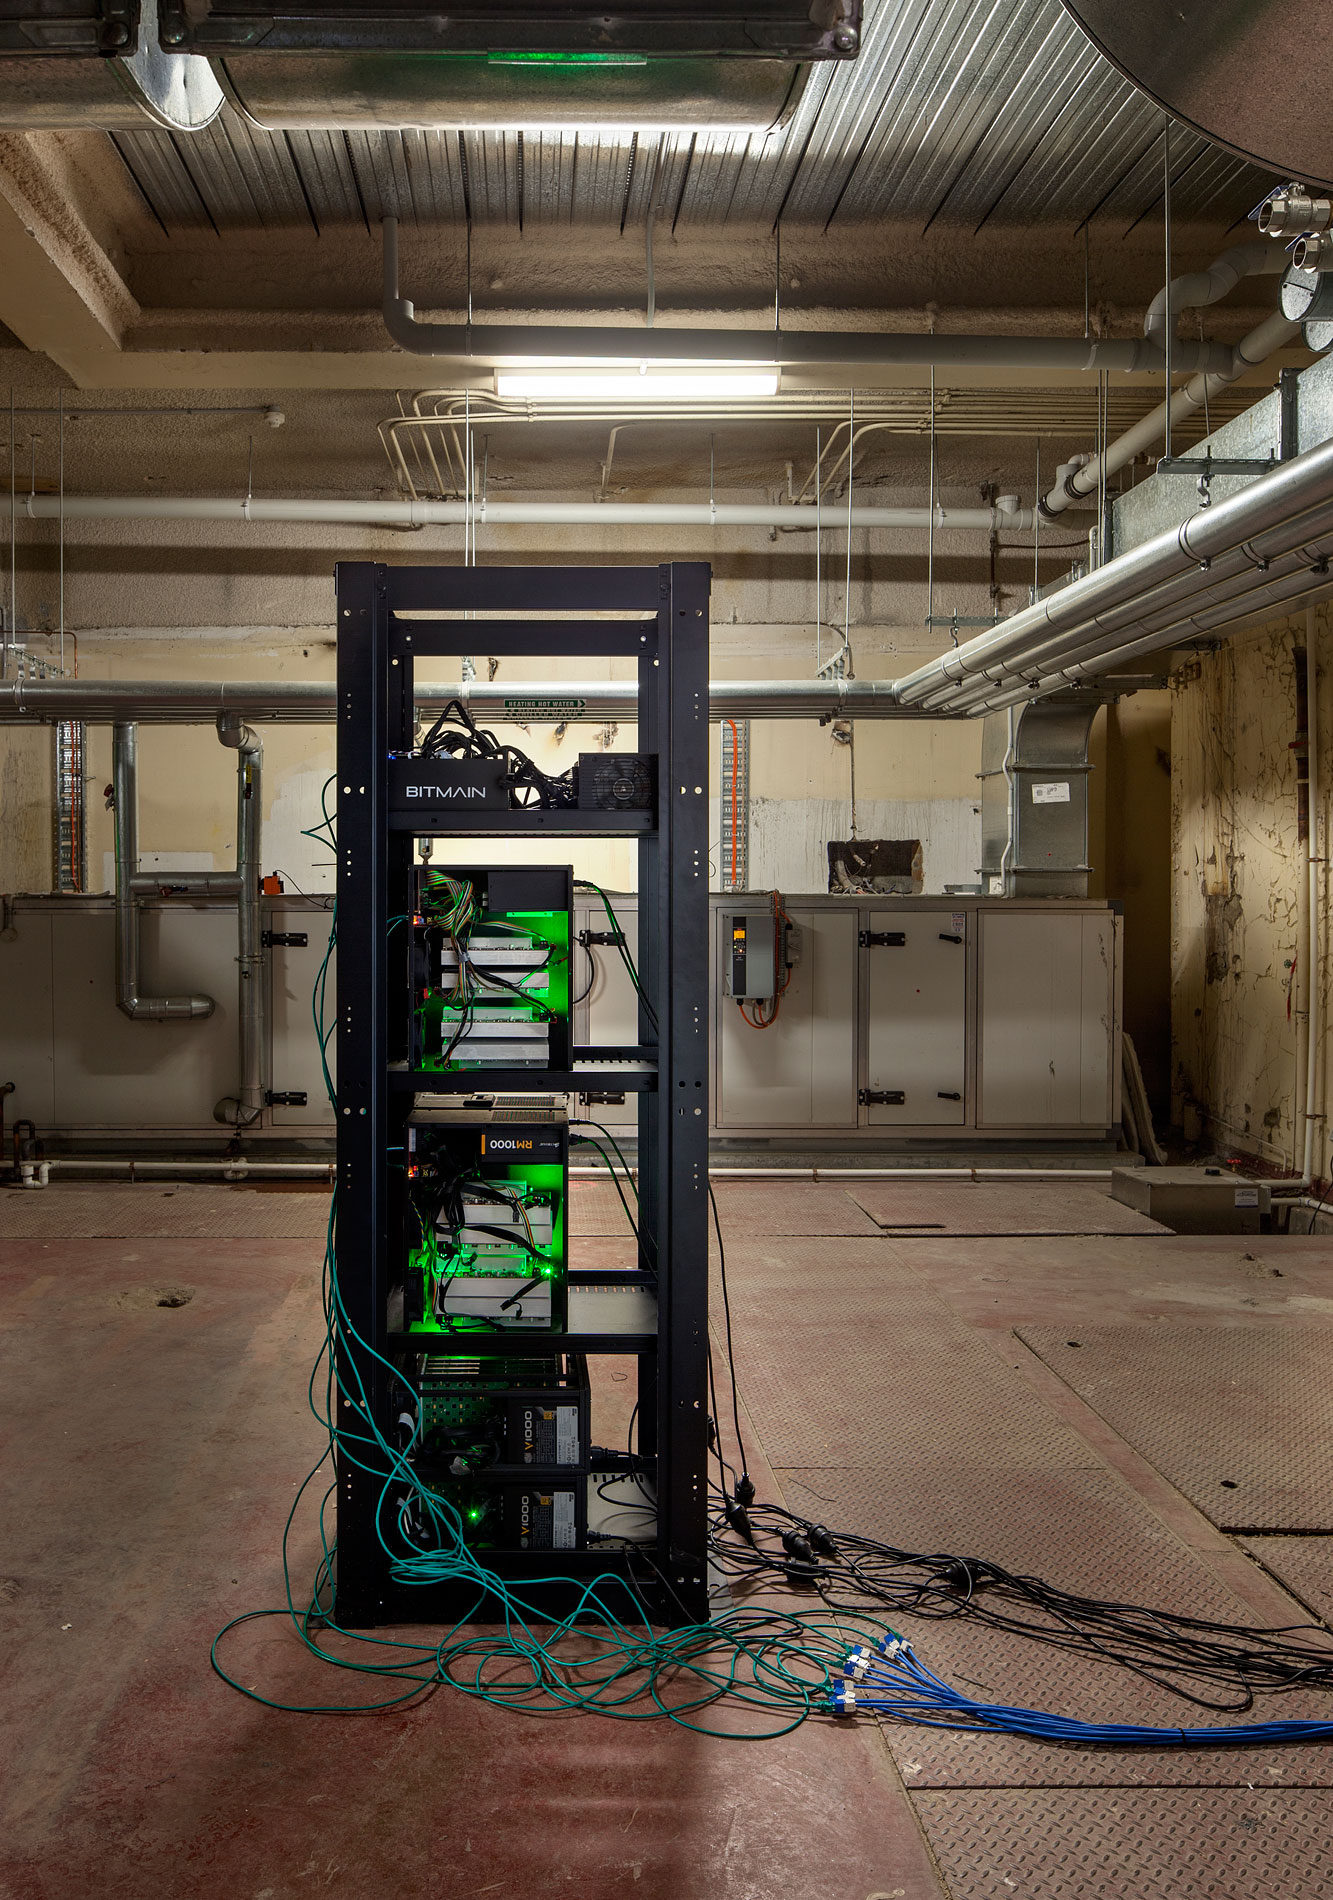 Nicholas Mangan, *Limits to Growth*, 2016, 9 terrahash Bitcoin ASIC mining rig. Installation detail, basement boiler room of Monash University Museum of Art, Melbourne, 2016. Photographer: Andrew Curtis.